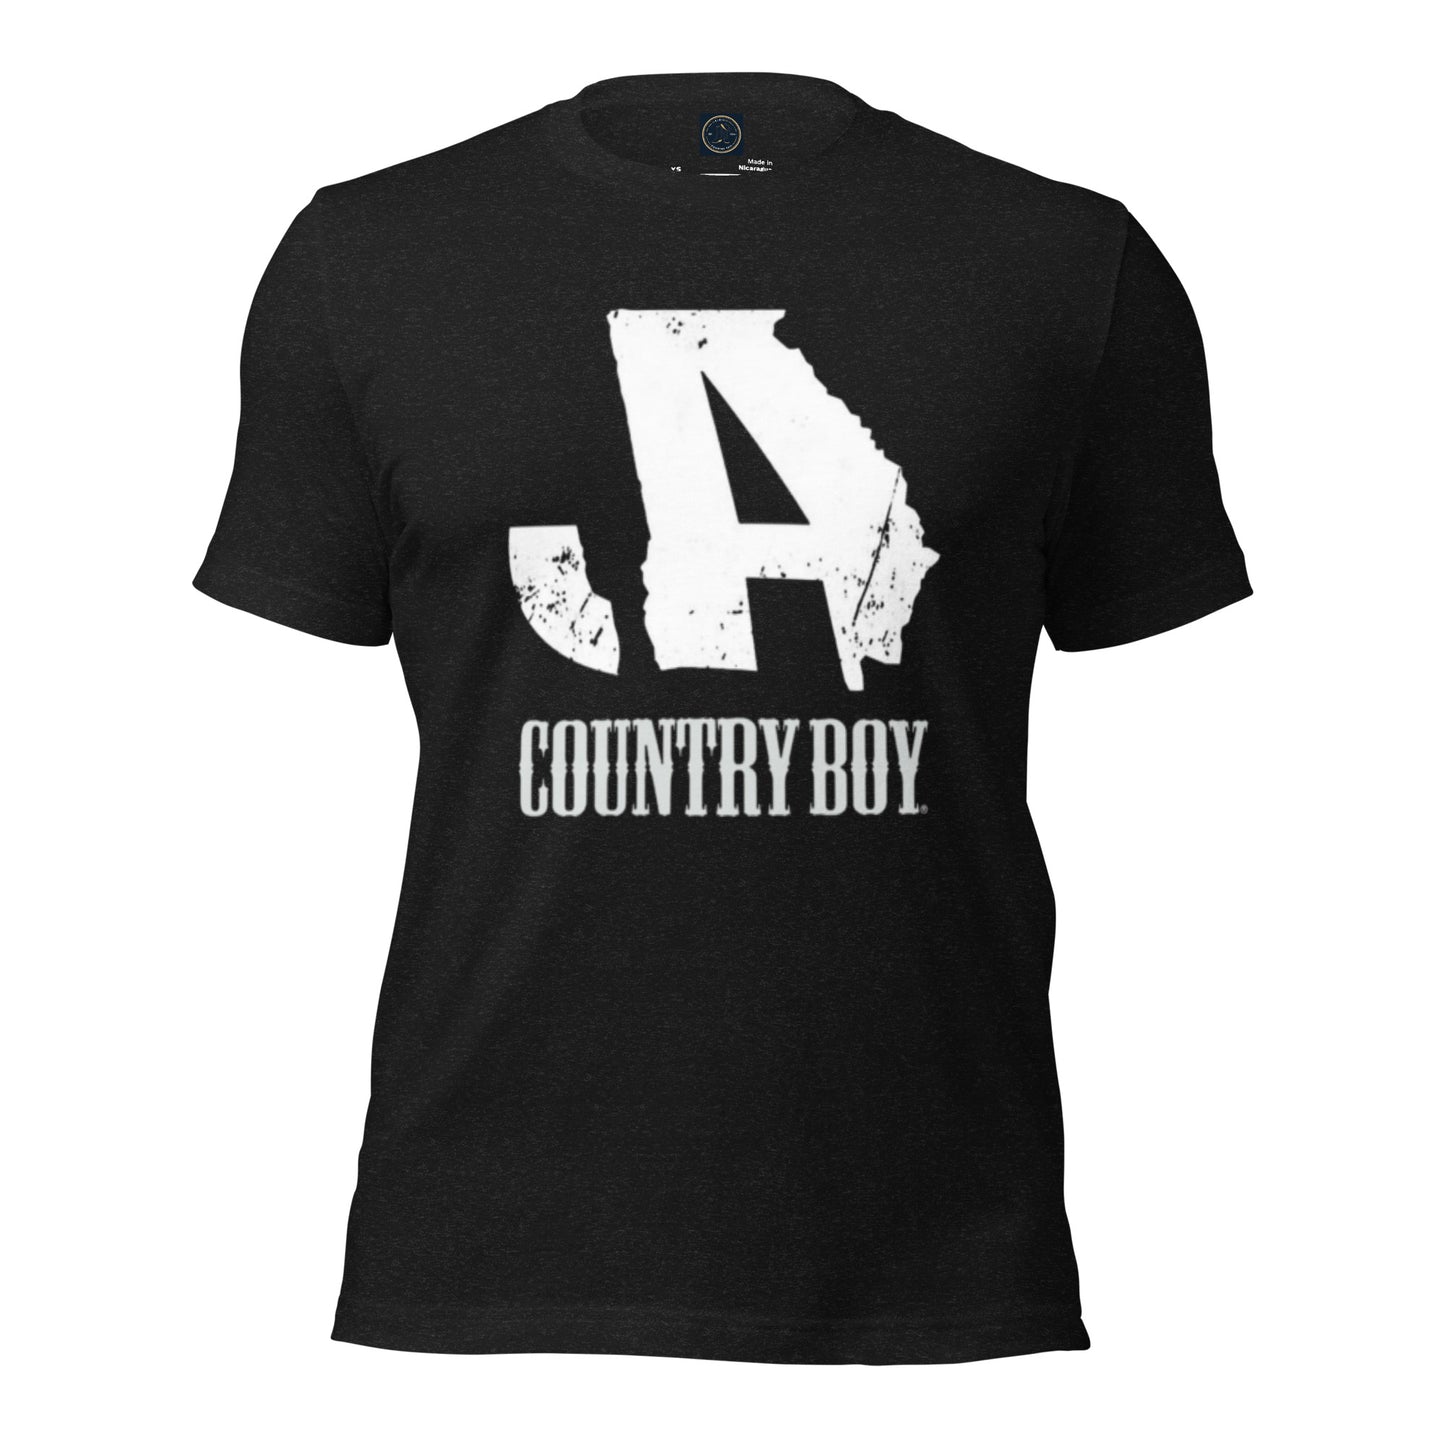 Country Boy - Get Your Twang On with Classic Country Tees - The Ultimate Unisex T-Shirt for True Country Souls! - Classic Country Tees